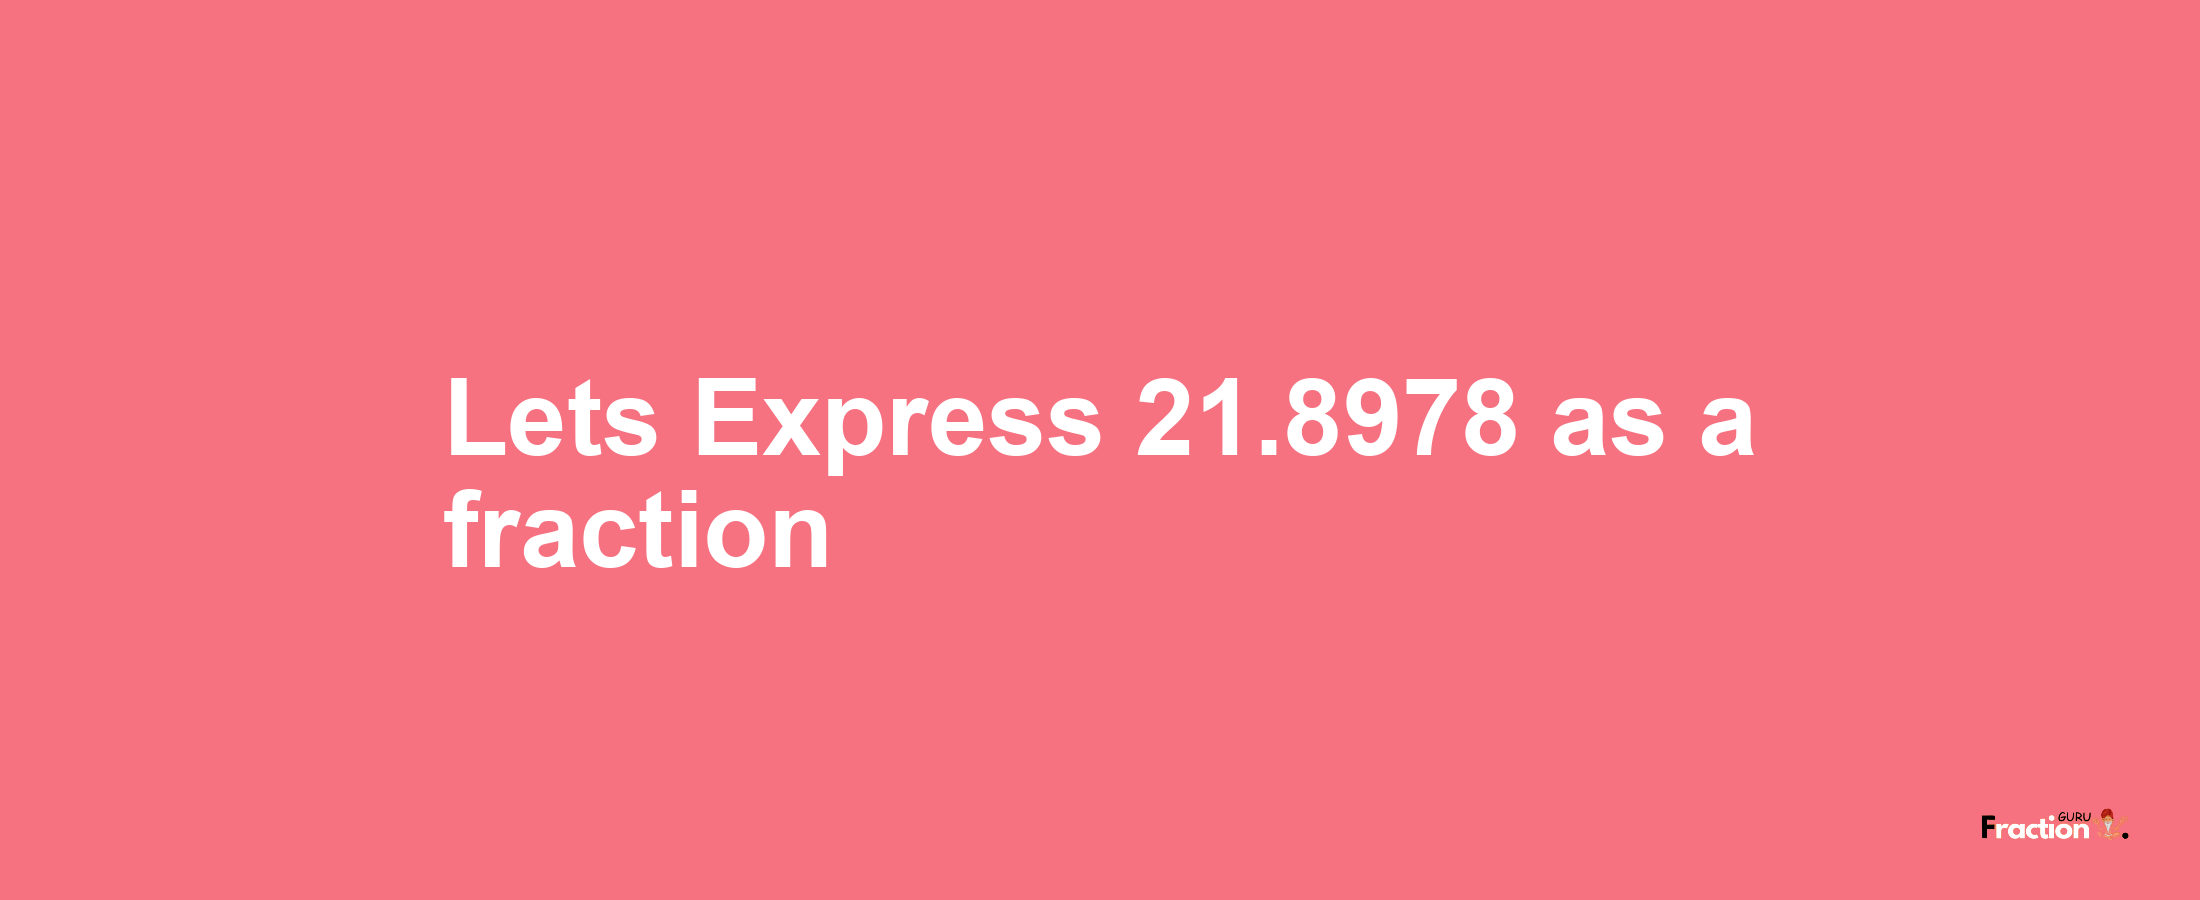 Lets Express 21.8978 as afraction